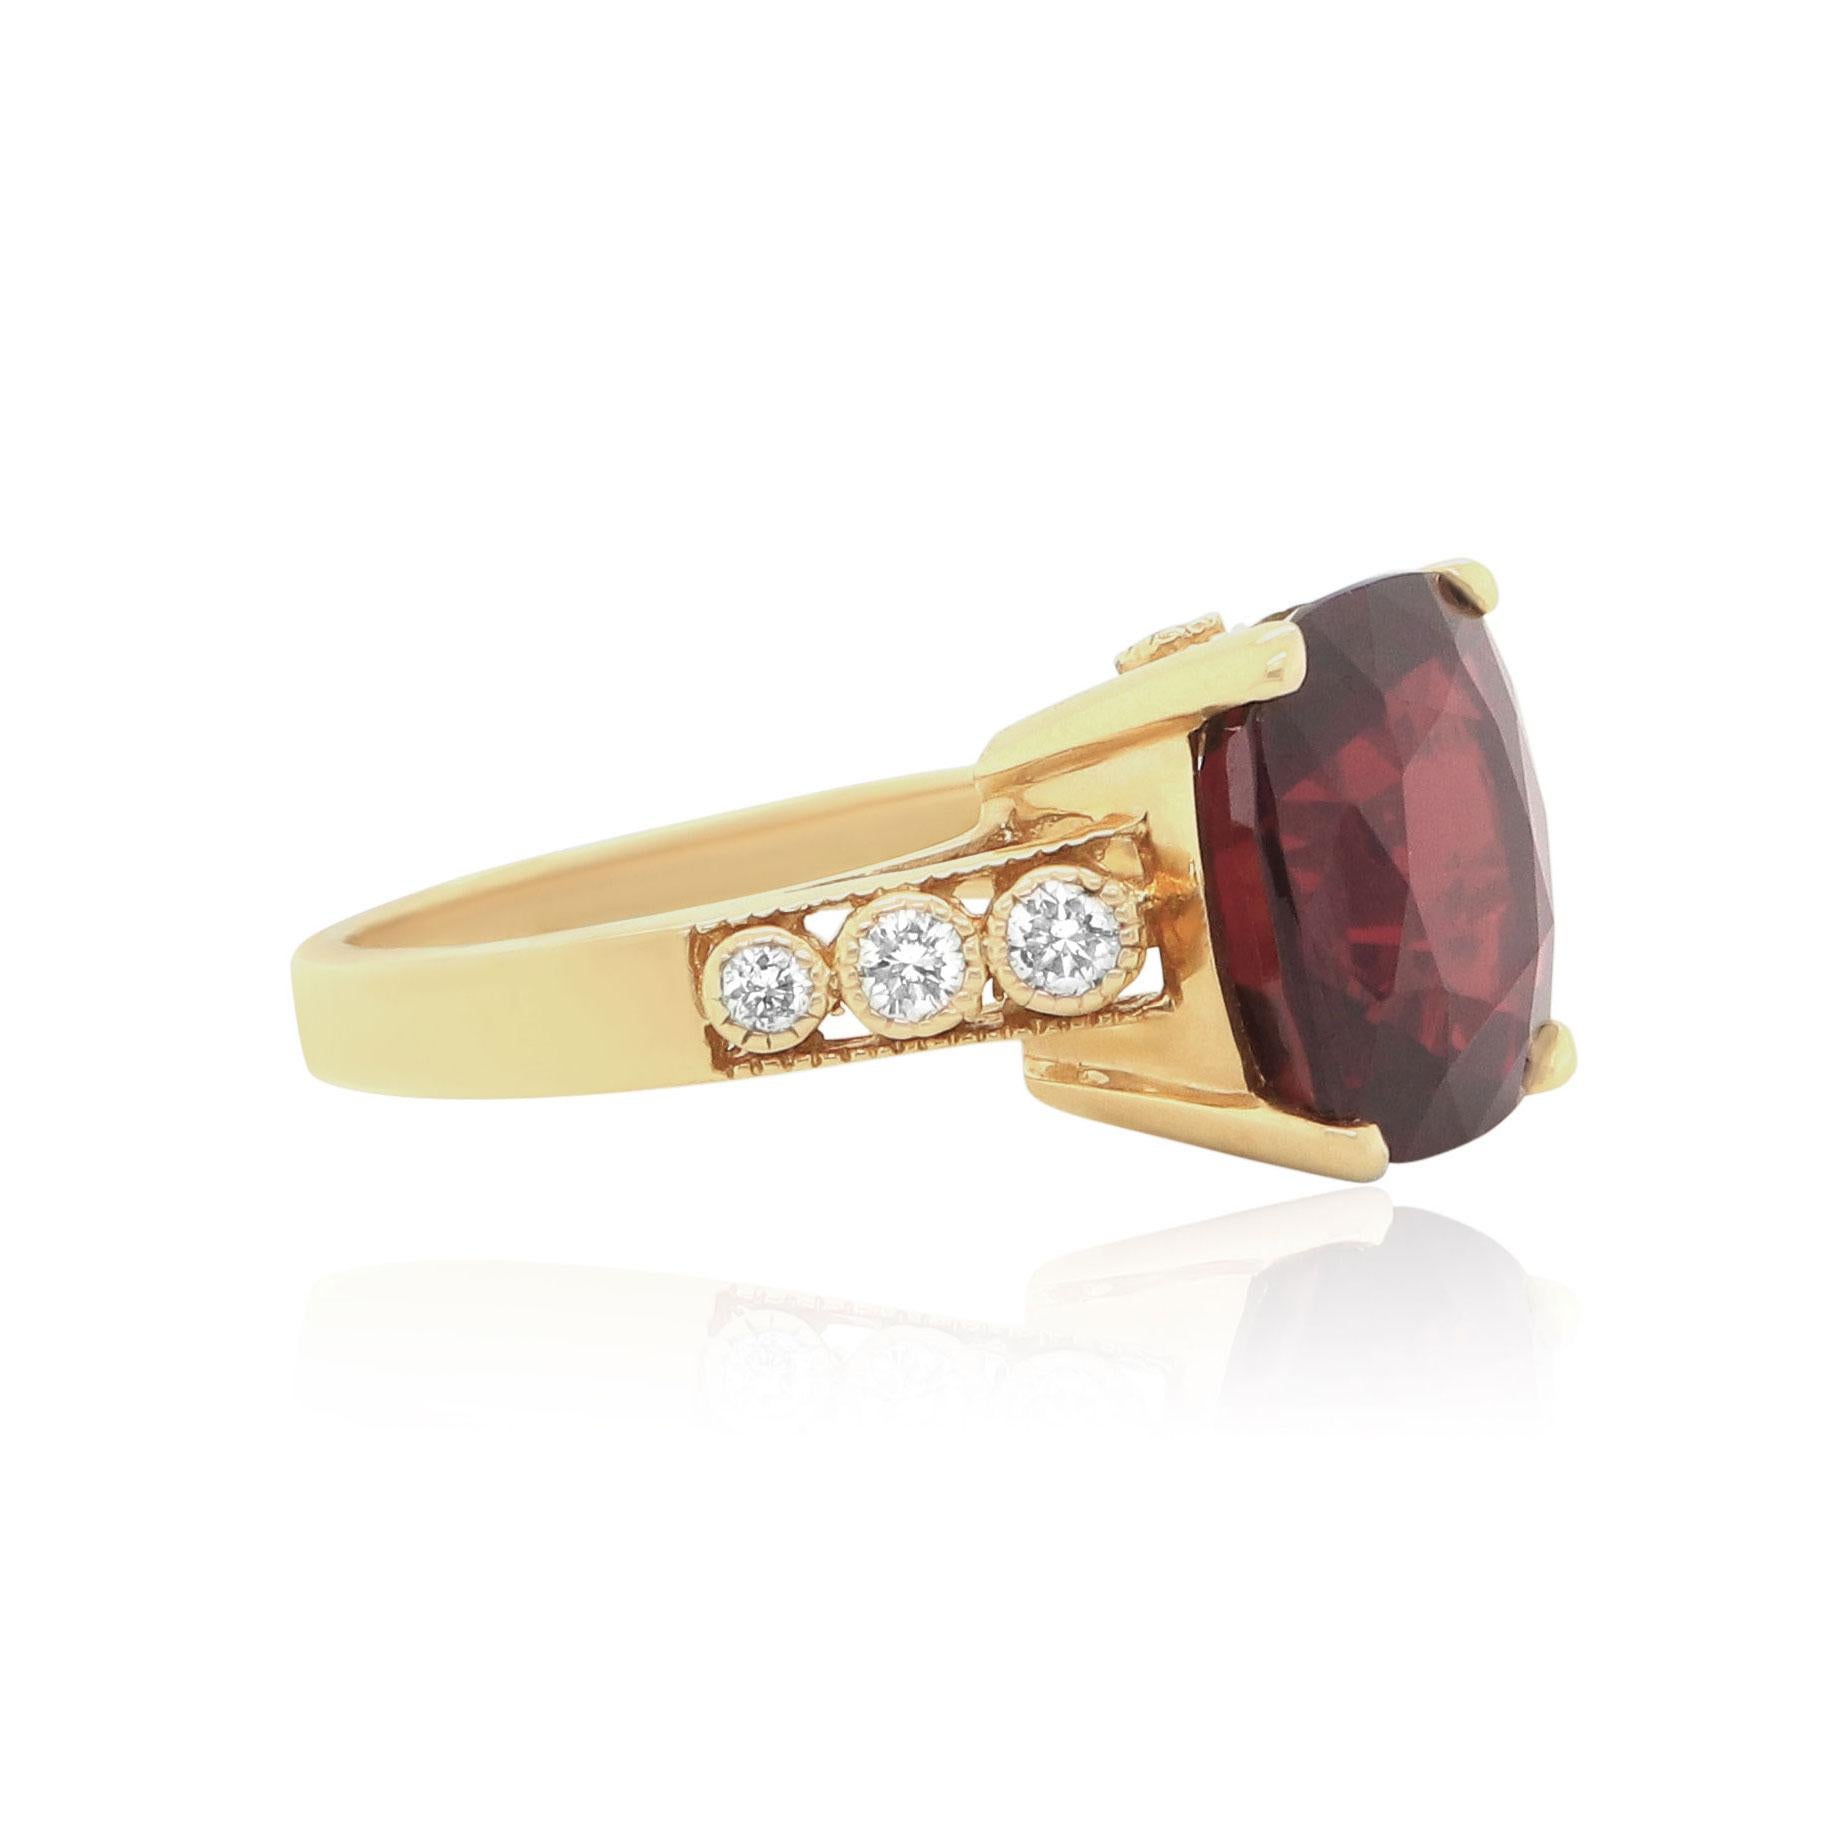 14K Yellow Gold
1 Cushion Cut Rhodolite Garnet at 8.18 Carats 
8 Round Brilliant White Diamonds at 0.29 Carats Total Weight

Alberto offers complimentary sizing on all rings.

Fine one-of-a-kind craftsmanship meets incredible quality in this